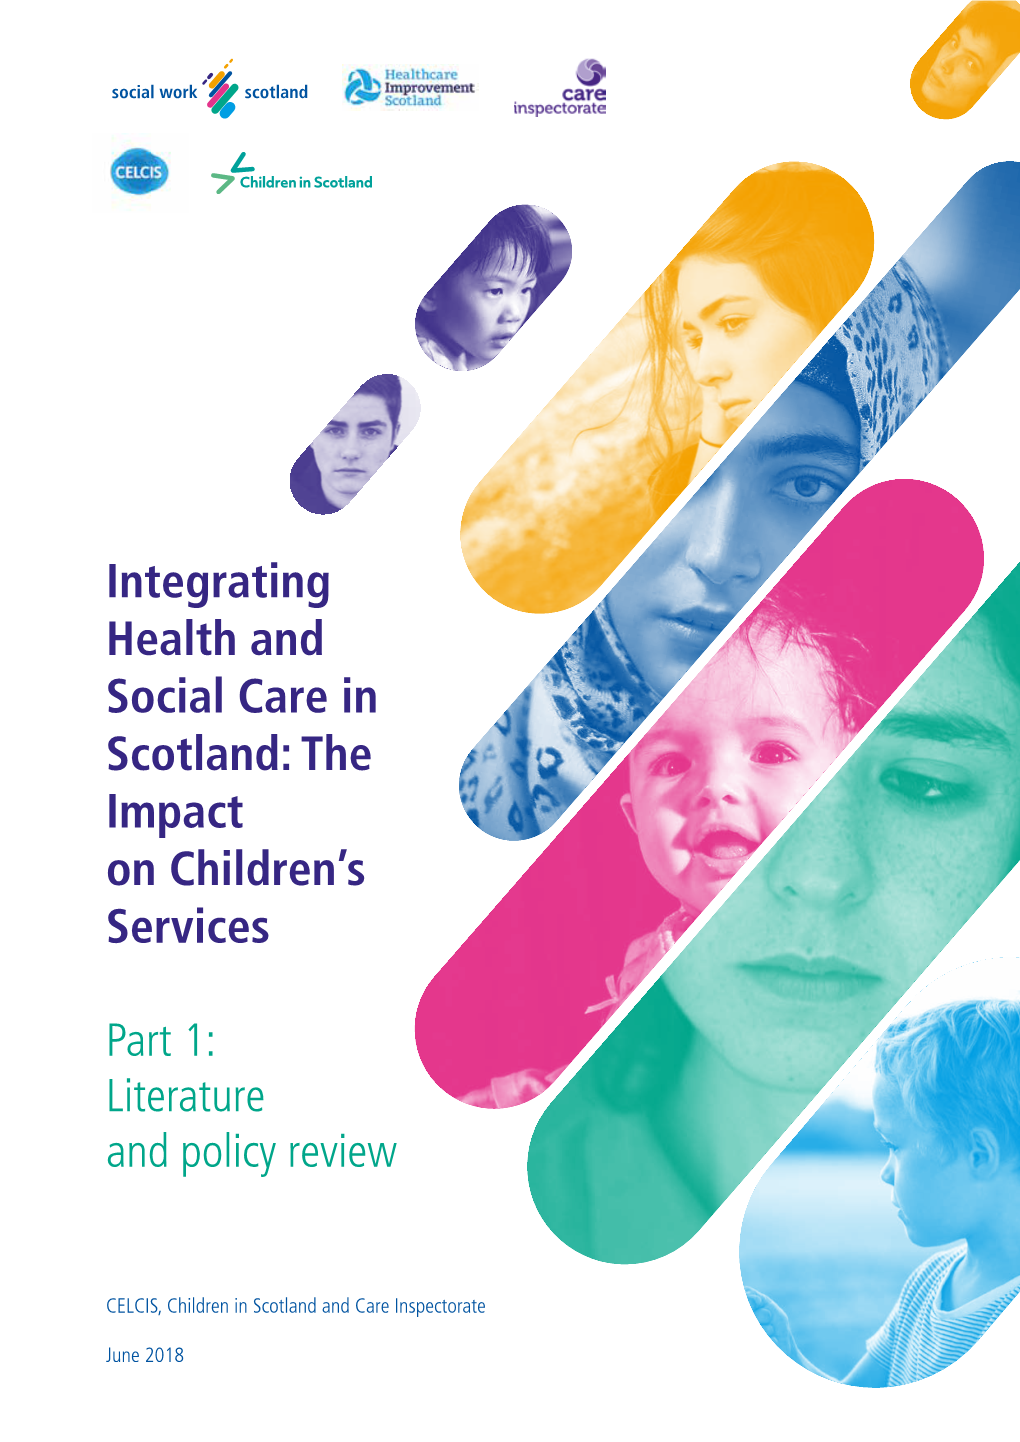 Integrating Health and Social Care in Scotland: the Impact on Children's